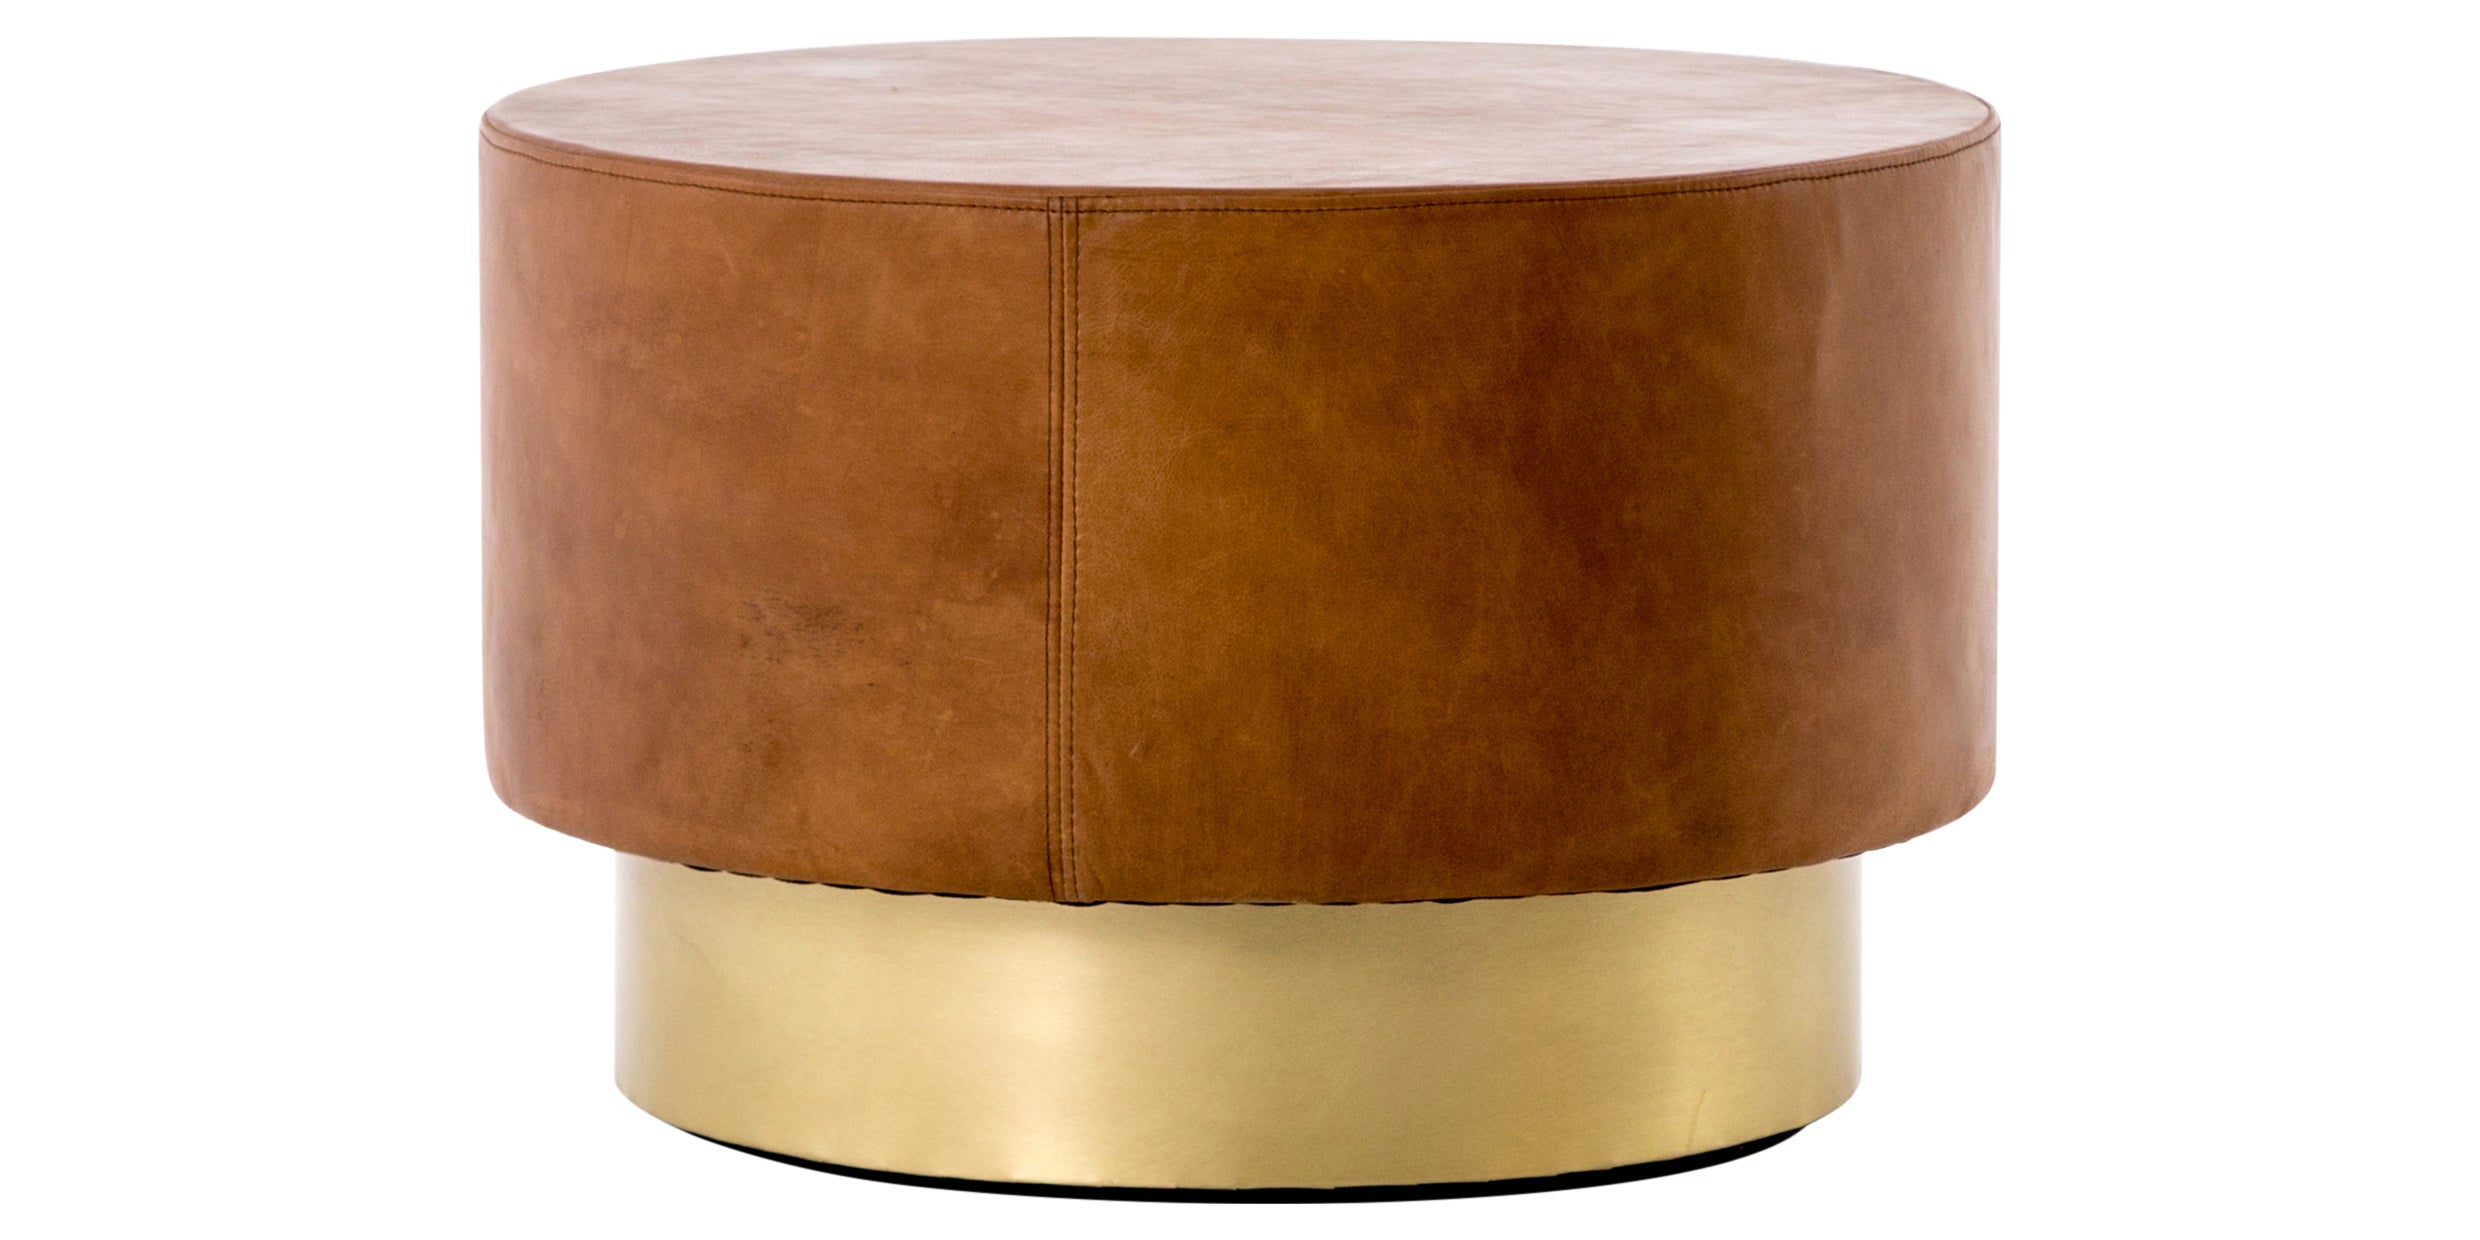 Patina Copper Leather with Bright Brass | Flint Bunching Table | Valley Ridge Furniture